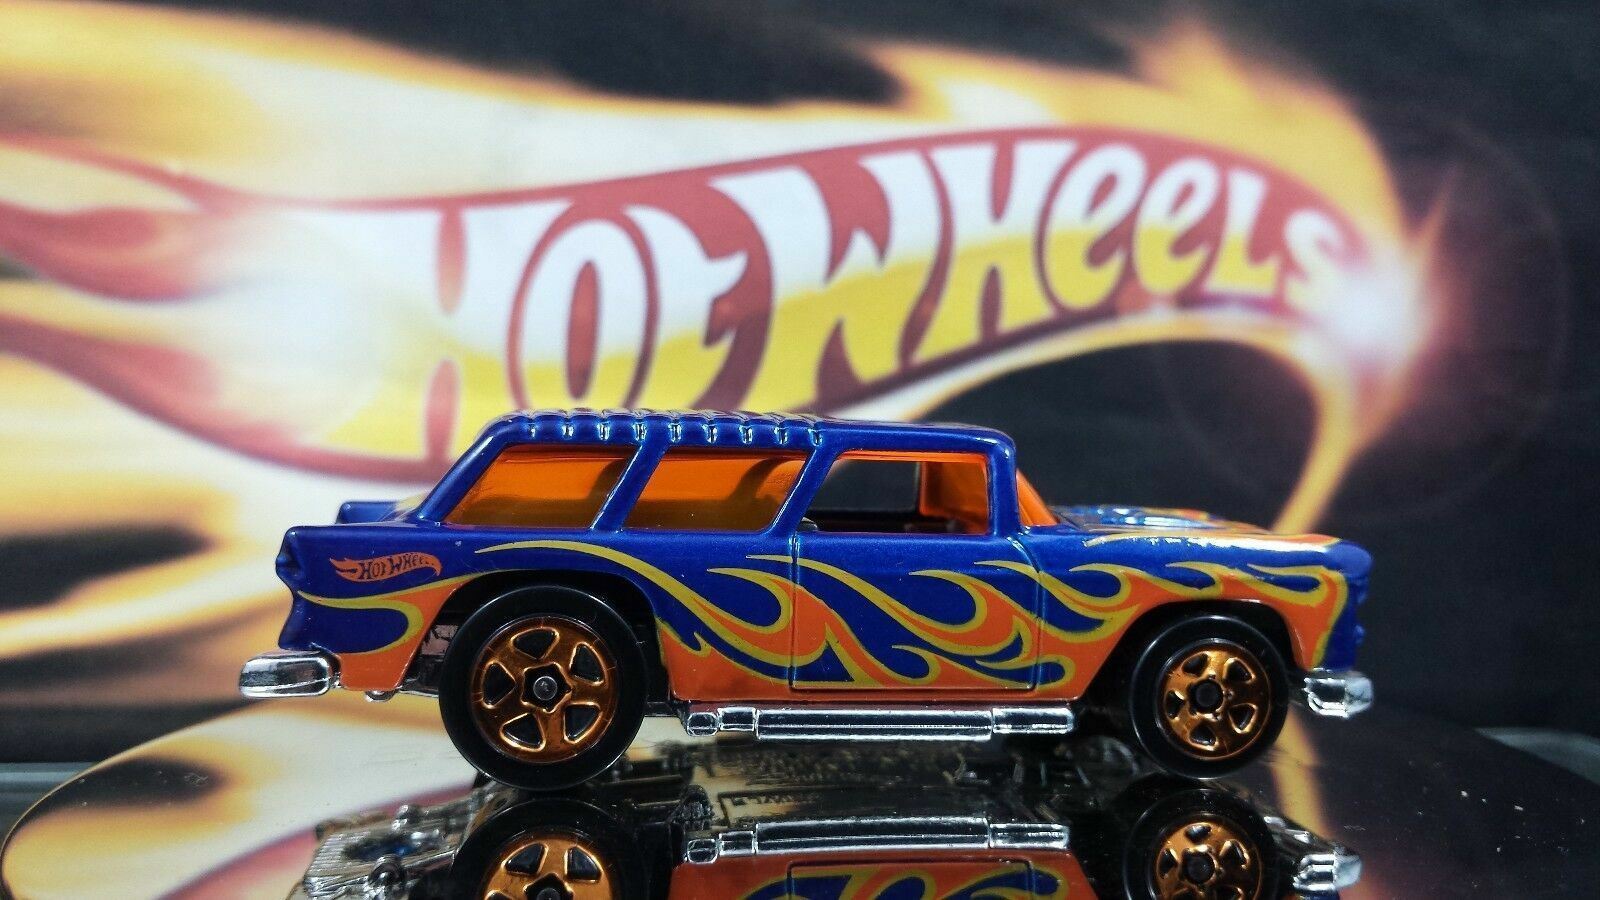 2018 Hot Wheels 55 Chevy Nomad